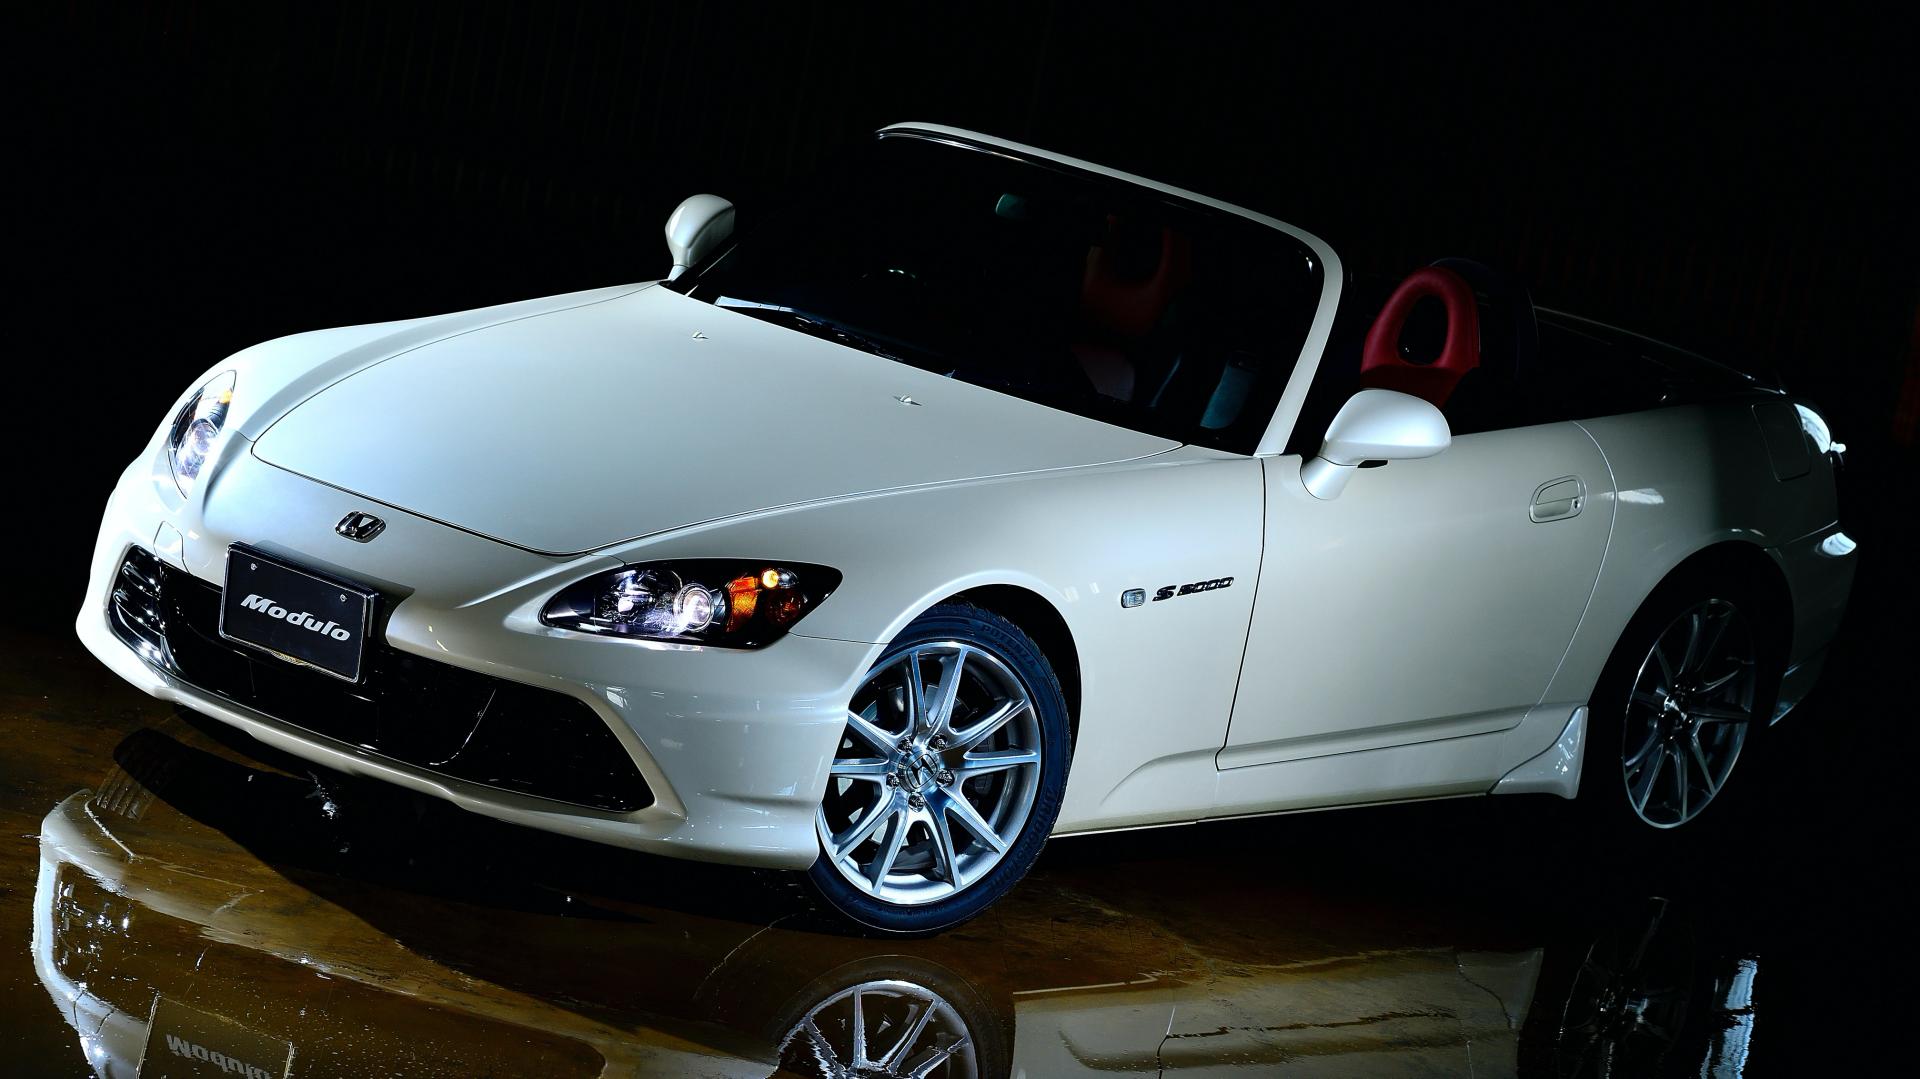 Honda To Freshen Up Your JDM S2000 Roadster With '20th Anniversary' Genuine Accessories Carscoops